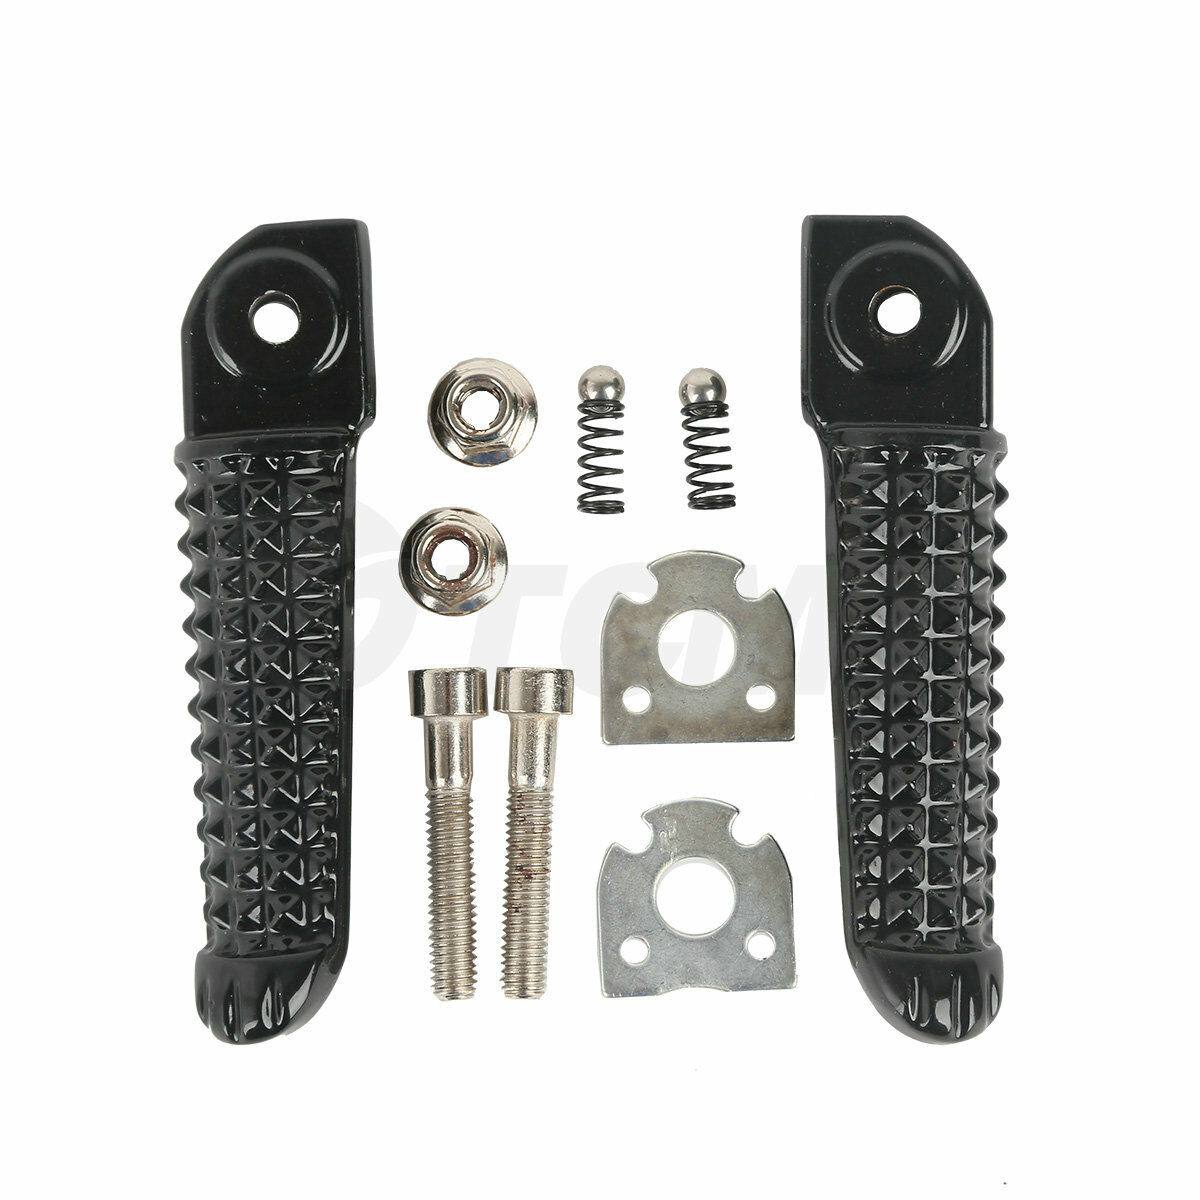 Black Rear Footrests Foot Pegs Passenger For YAMAHA YZF R1 02-14 R6 03-17 16 - Moto Life Products